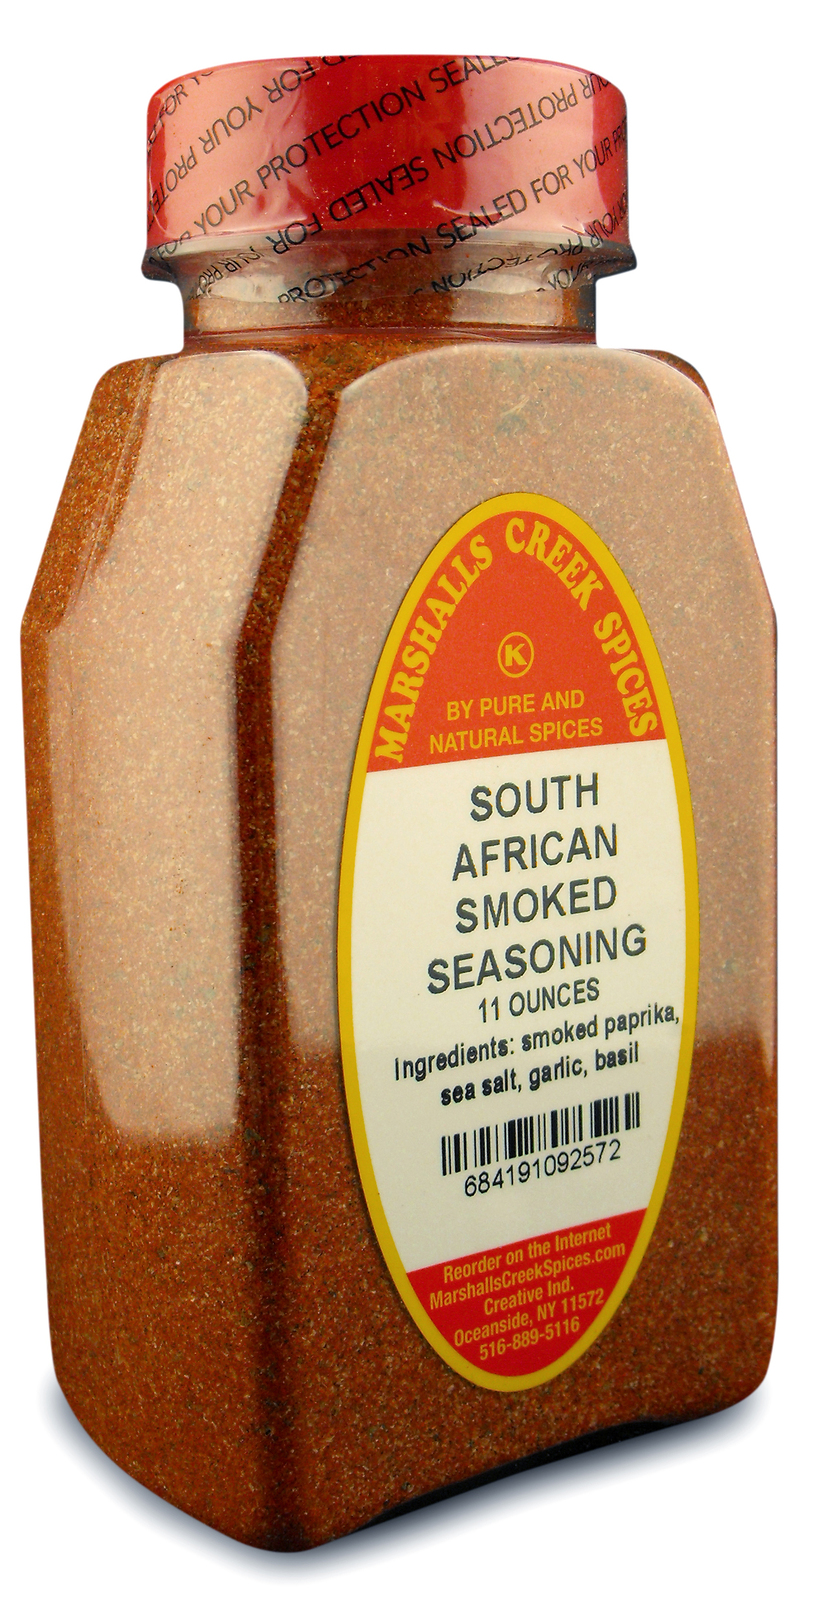 Marshalls Creek Kosher Spices (bz08) Compare To, Trader Joe's South African Smok